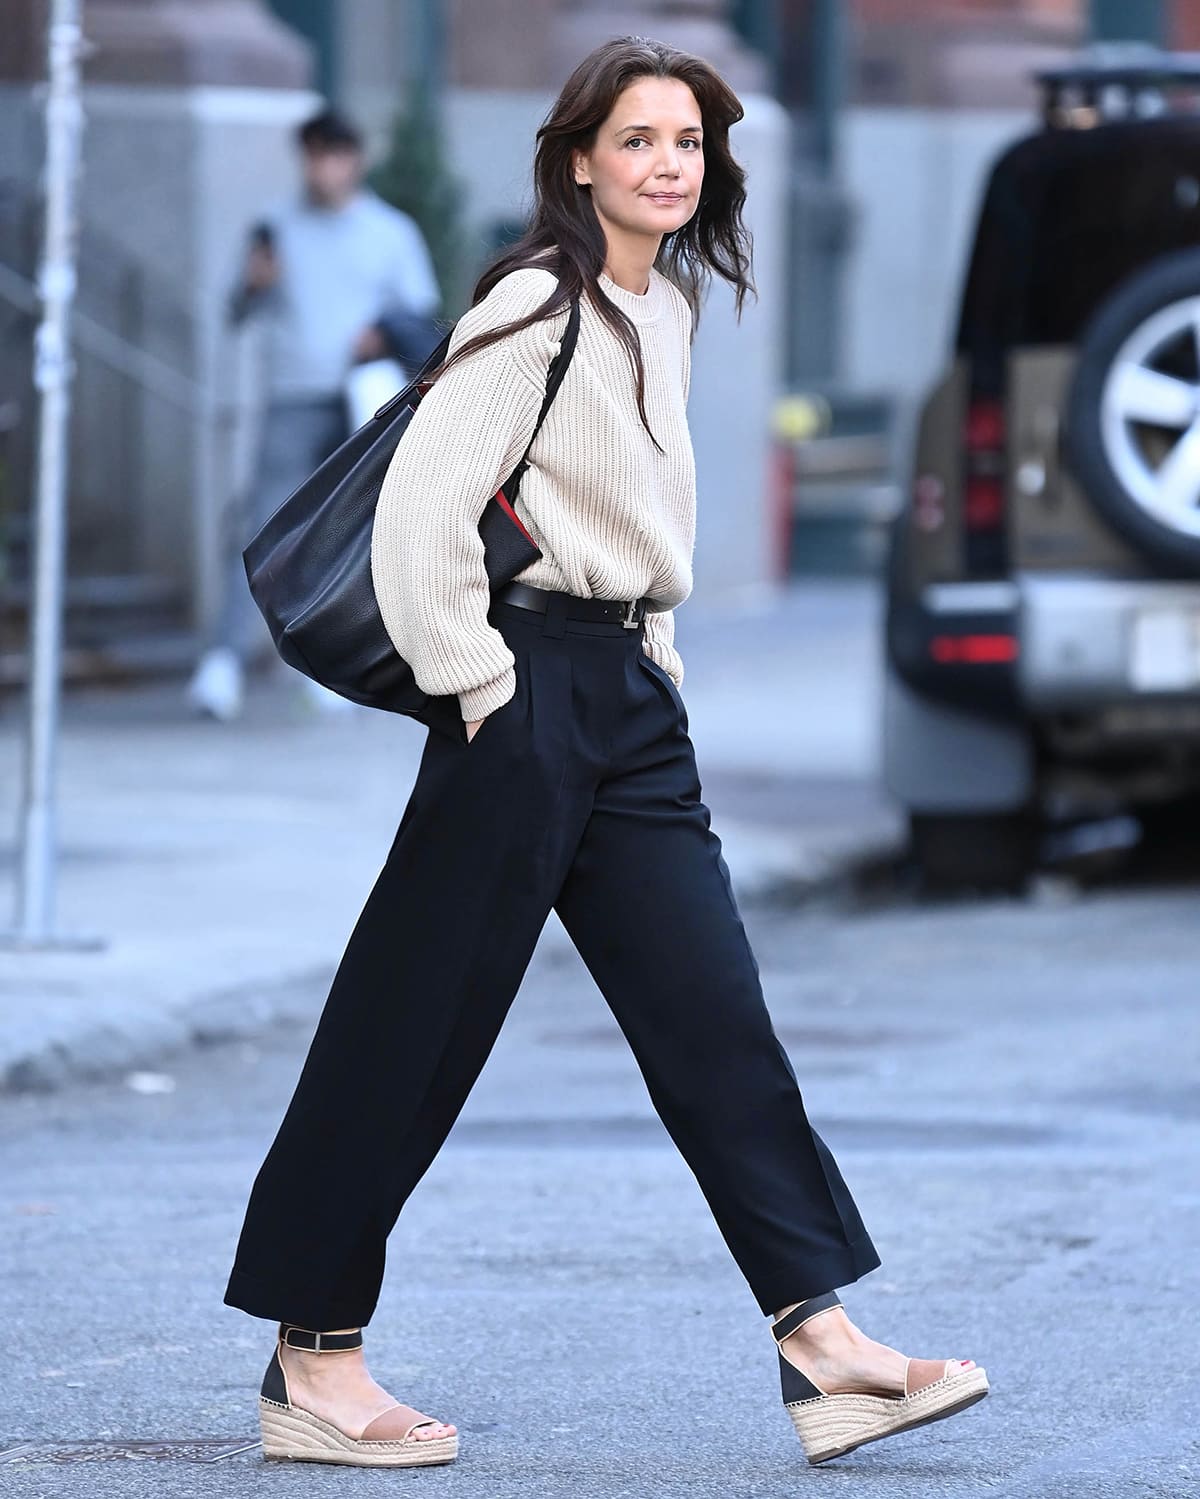 Katie Holmes steps out in New York City on the first day of spring in neutral outfit with espadrille wedge heels on March 19, 2024